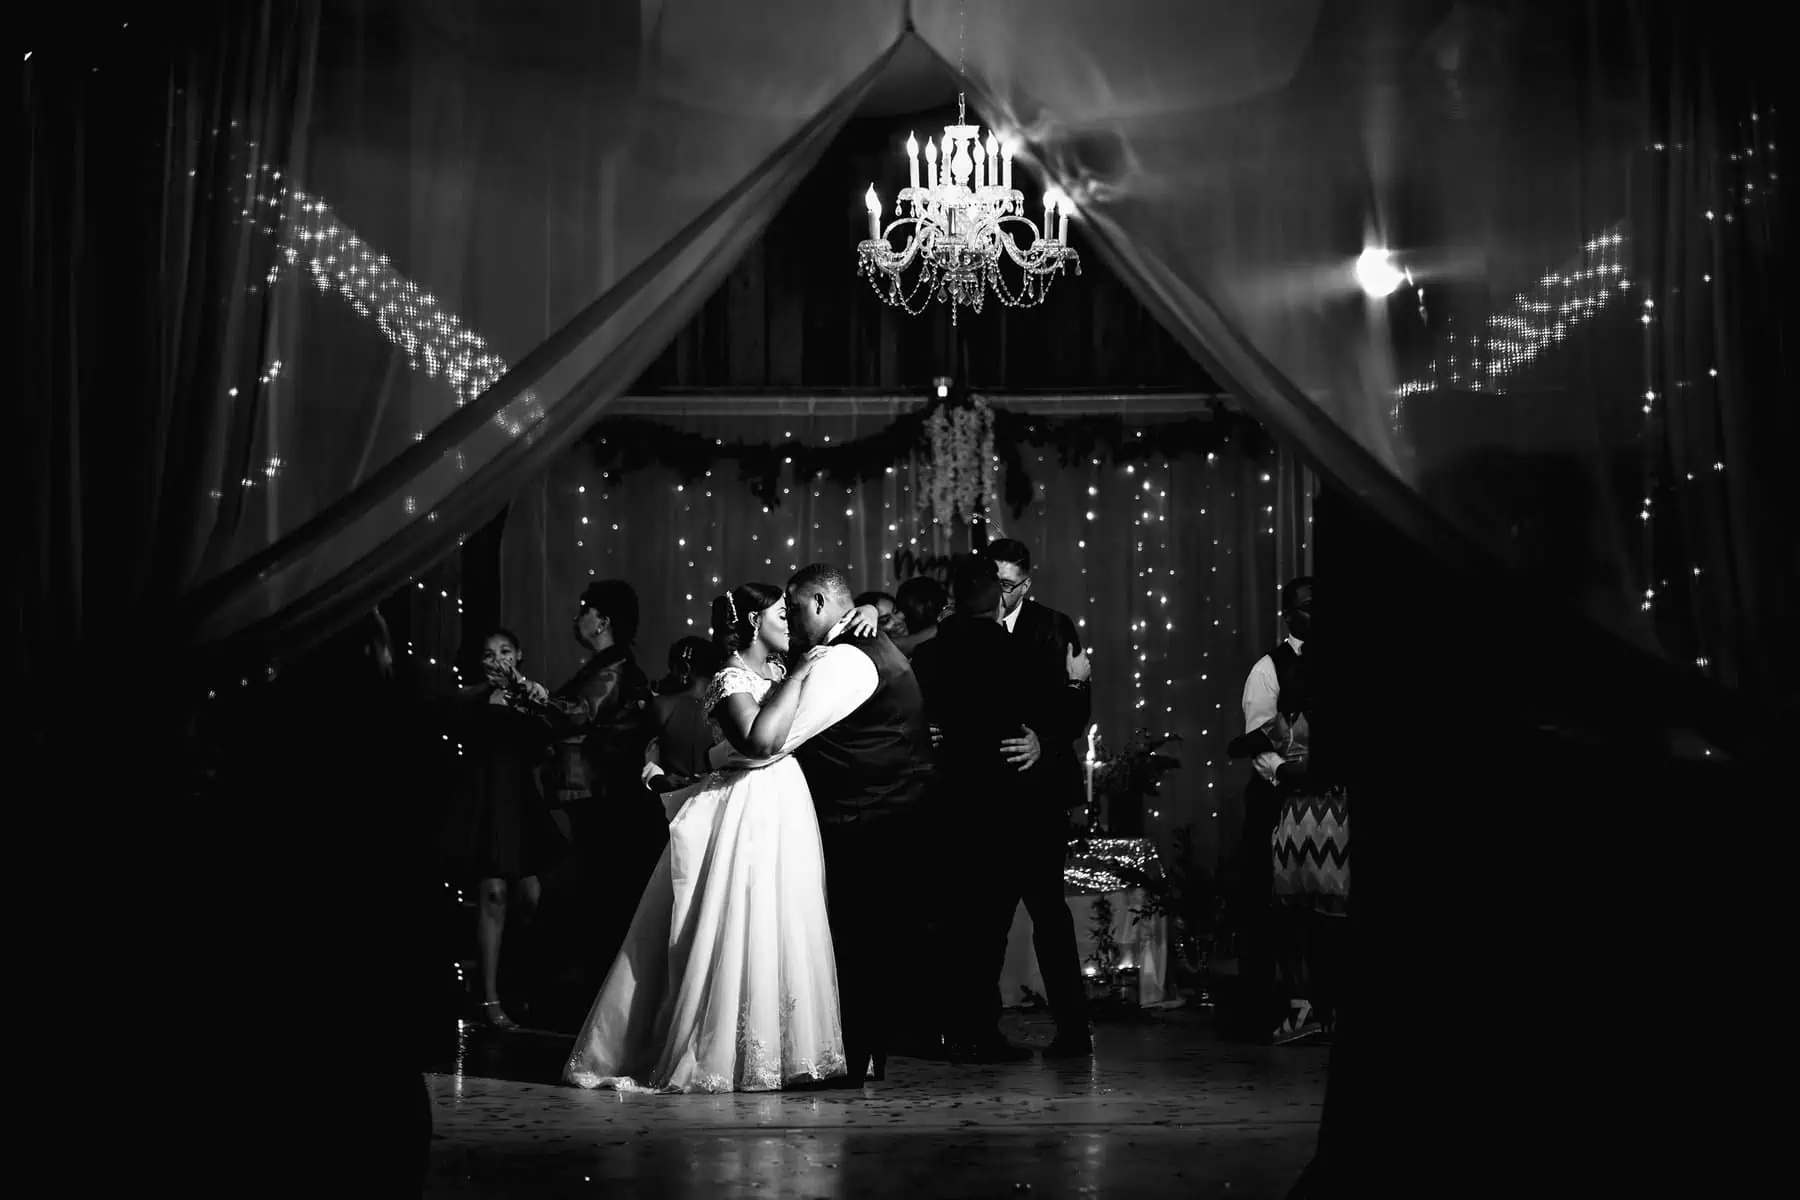 A bride and groom share their first dance in front of a chandelier.